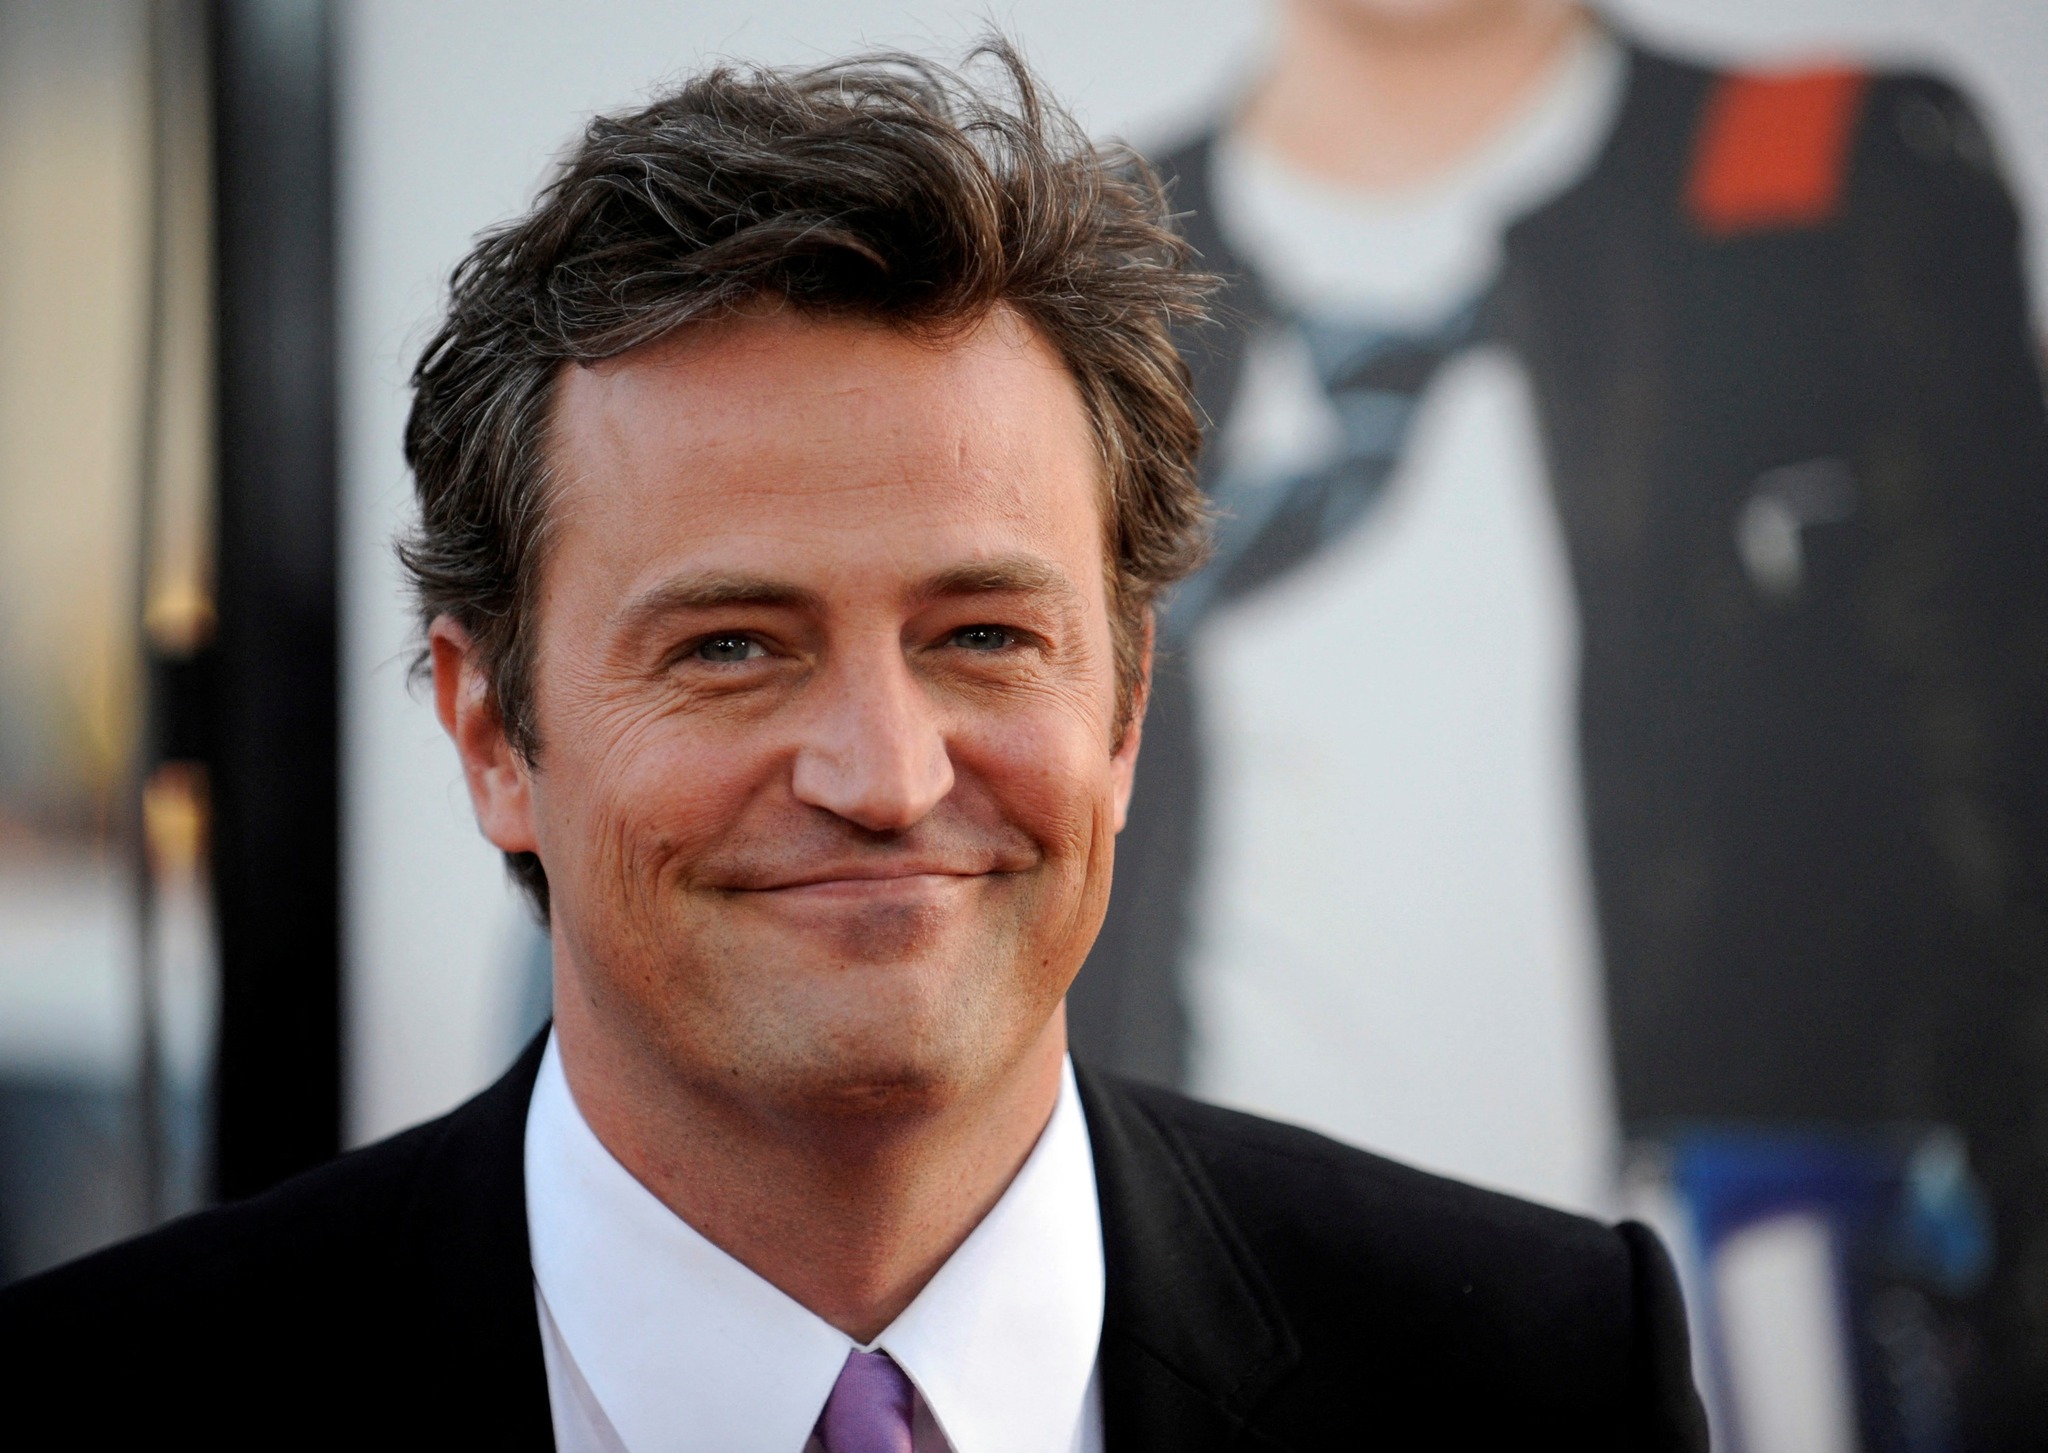 LA County Coroner’s Office defers Friends star Matthew Perry’s cause of death